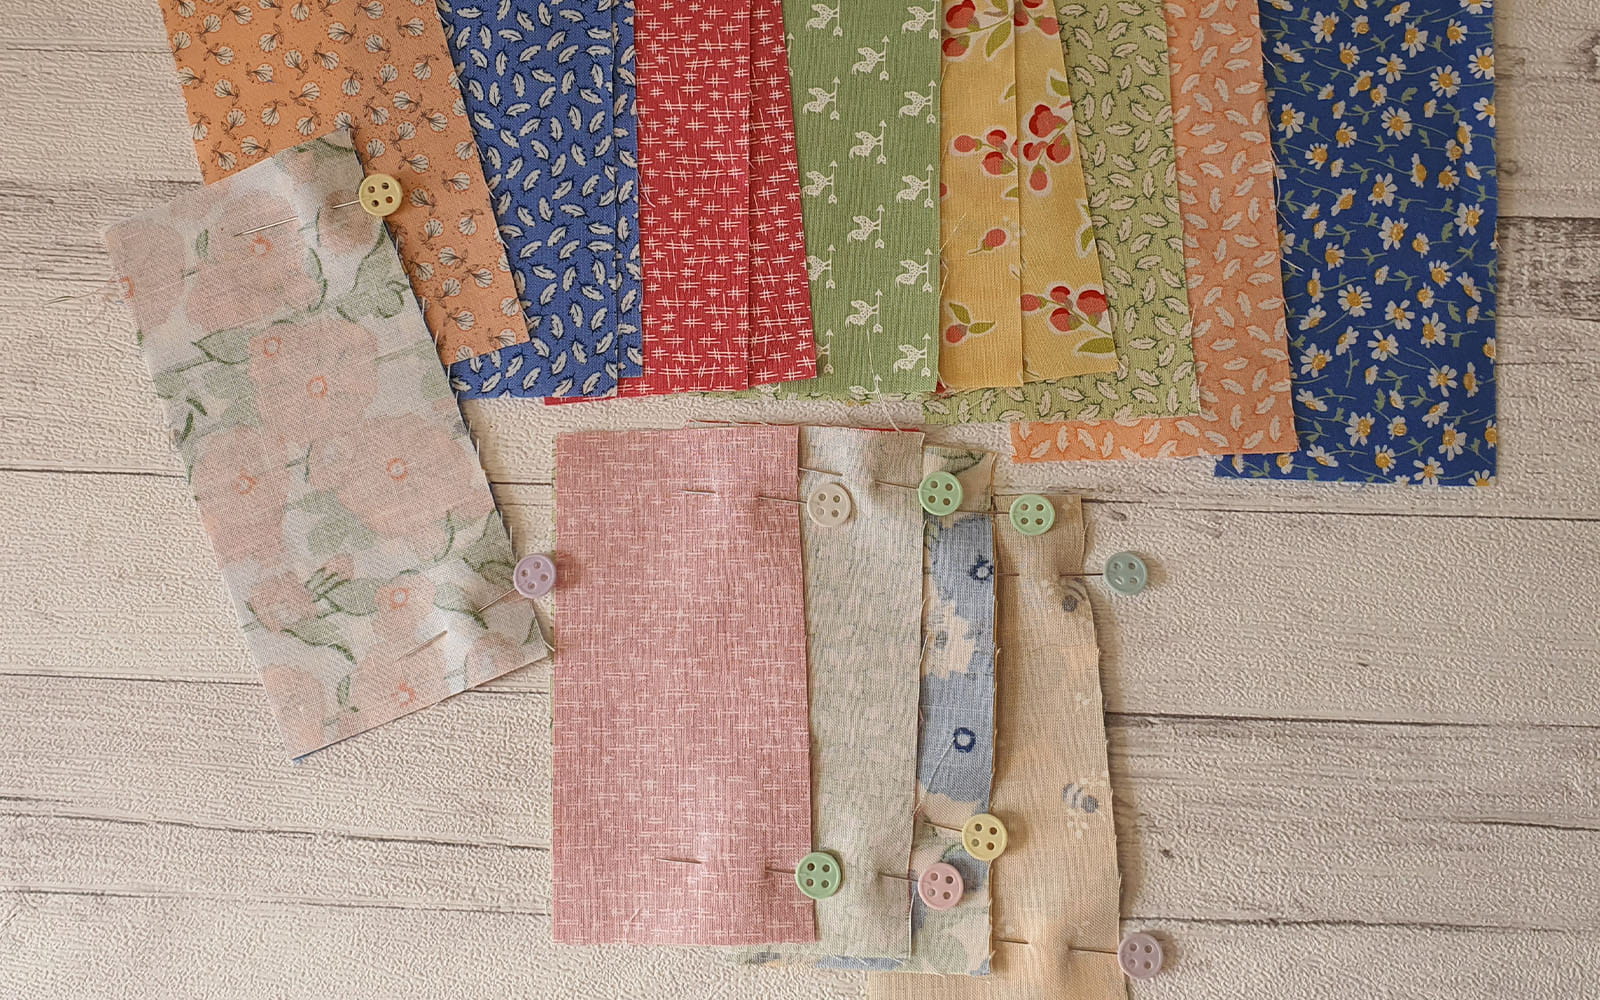 Cut pieces of the different fabrics